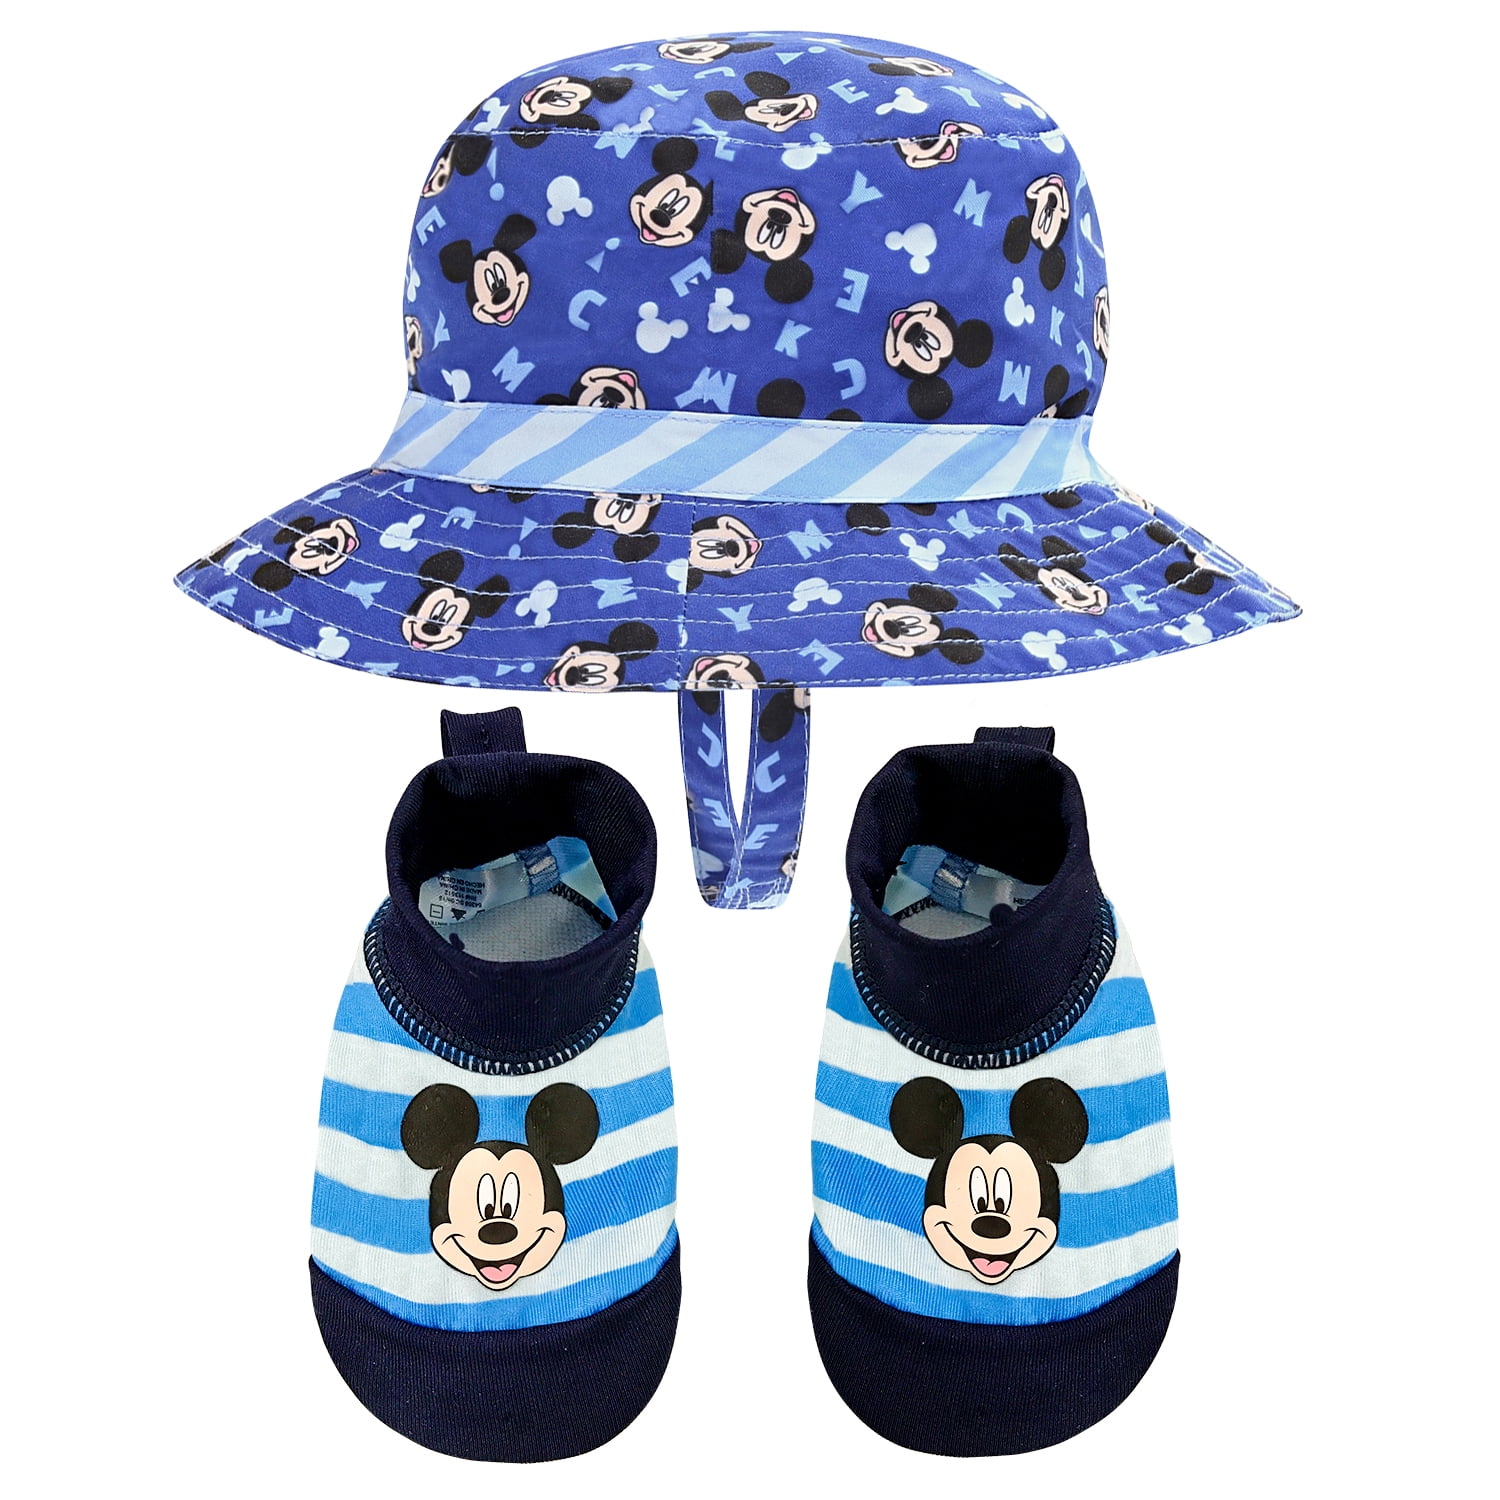 Mickey Mouse baby toddler swimming beach costume with sun flap hat Primark BNWT 